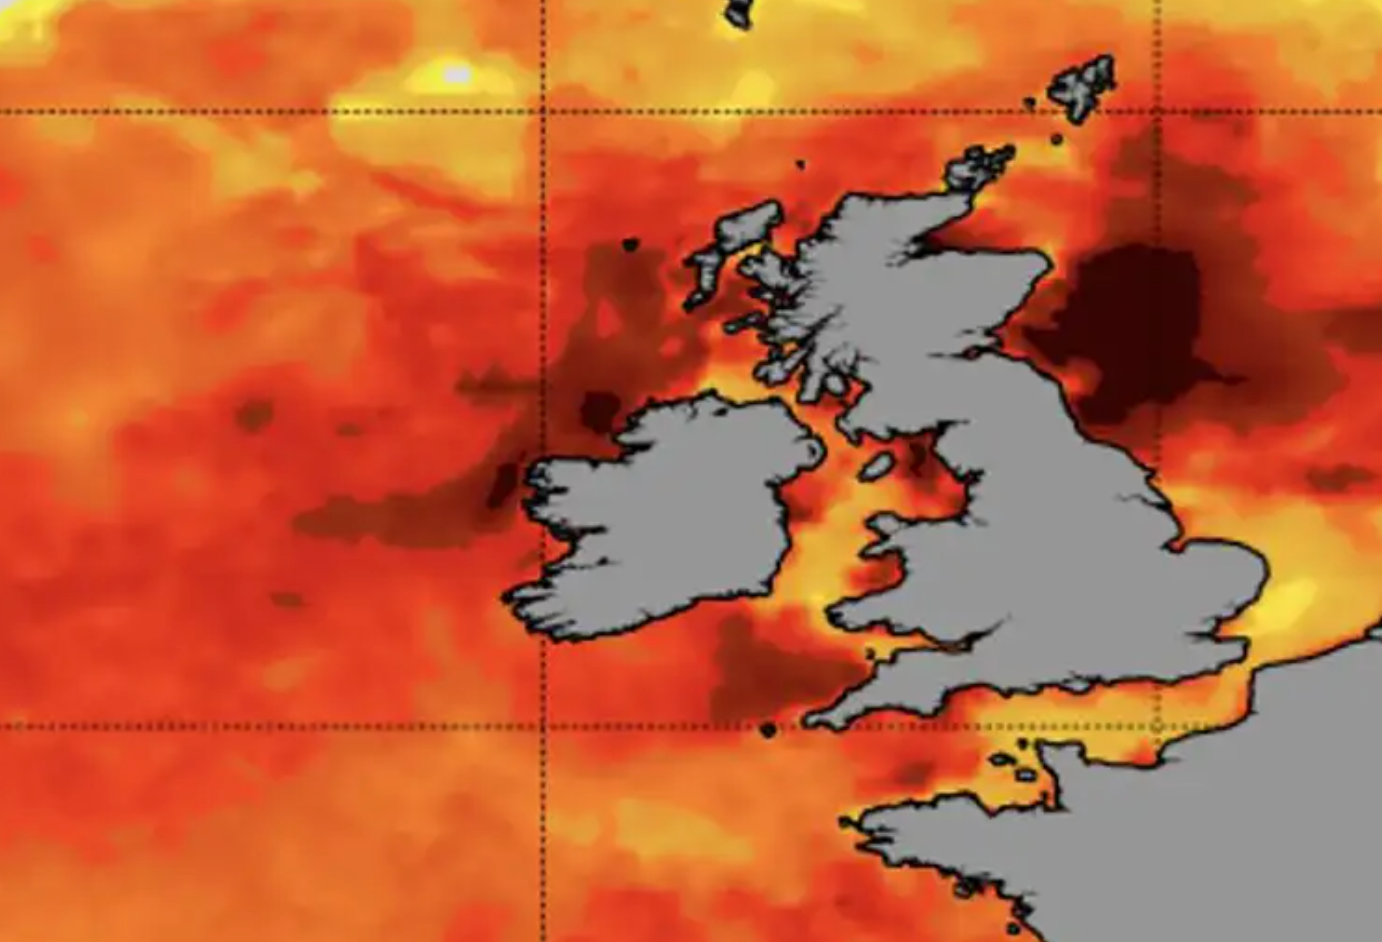 An ‘unheard of’ marine heatwave has developed in coastal waters off the UK and Ireland